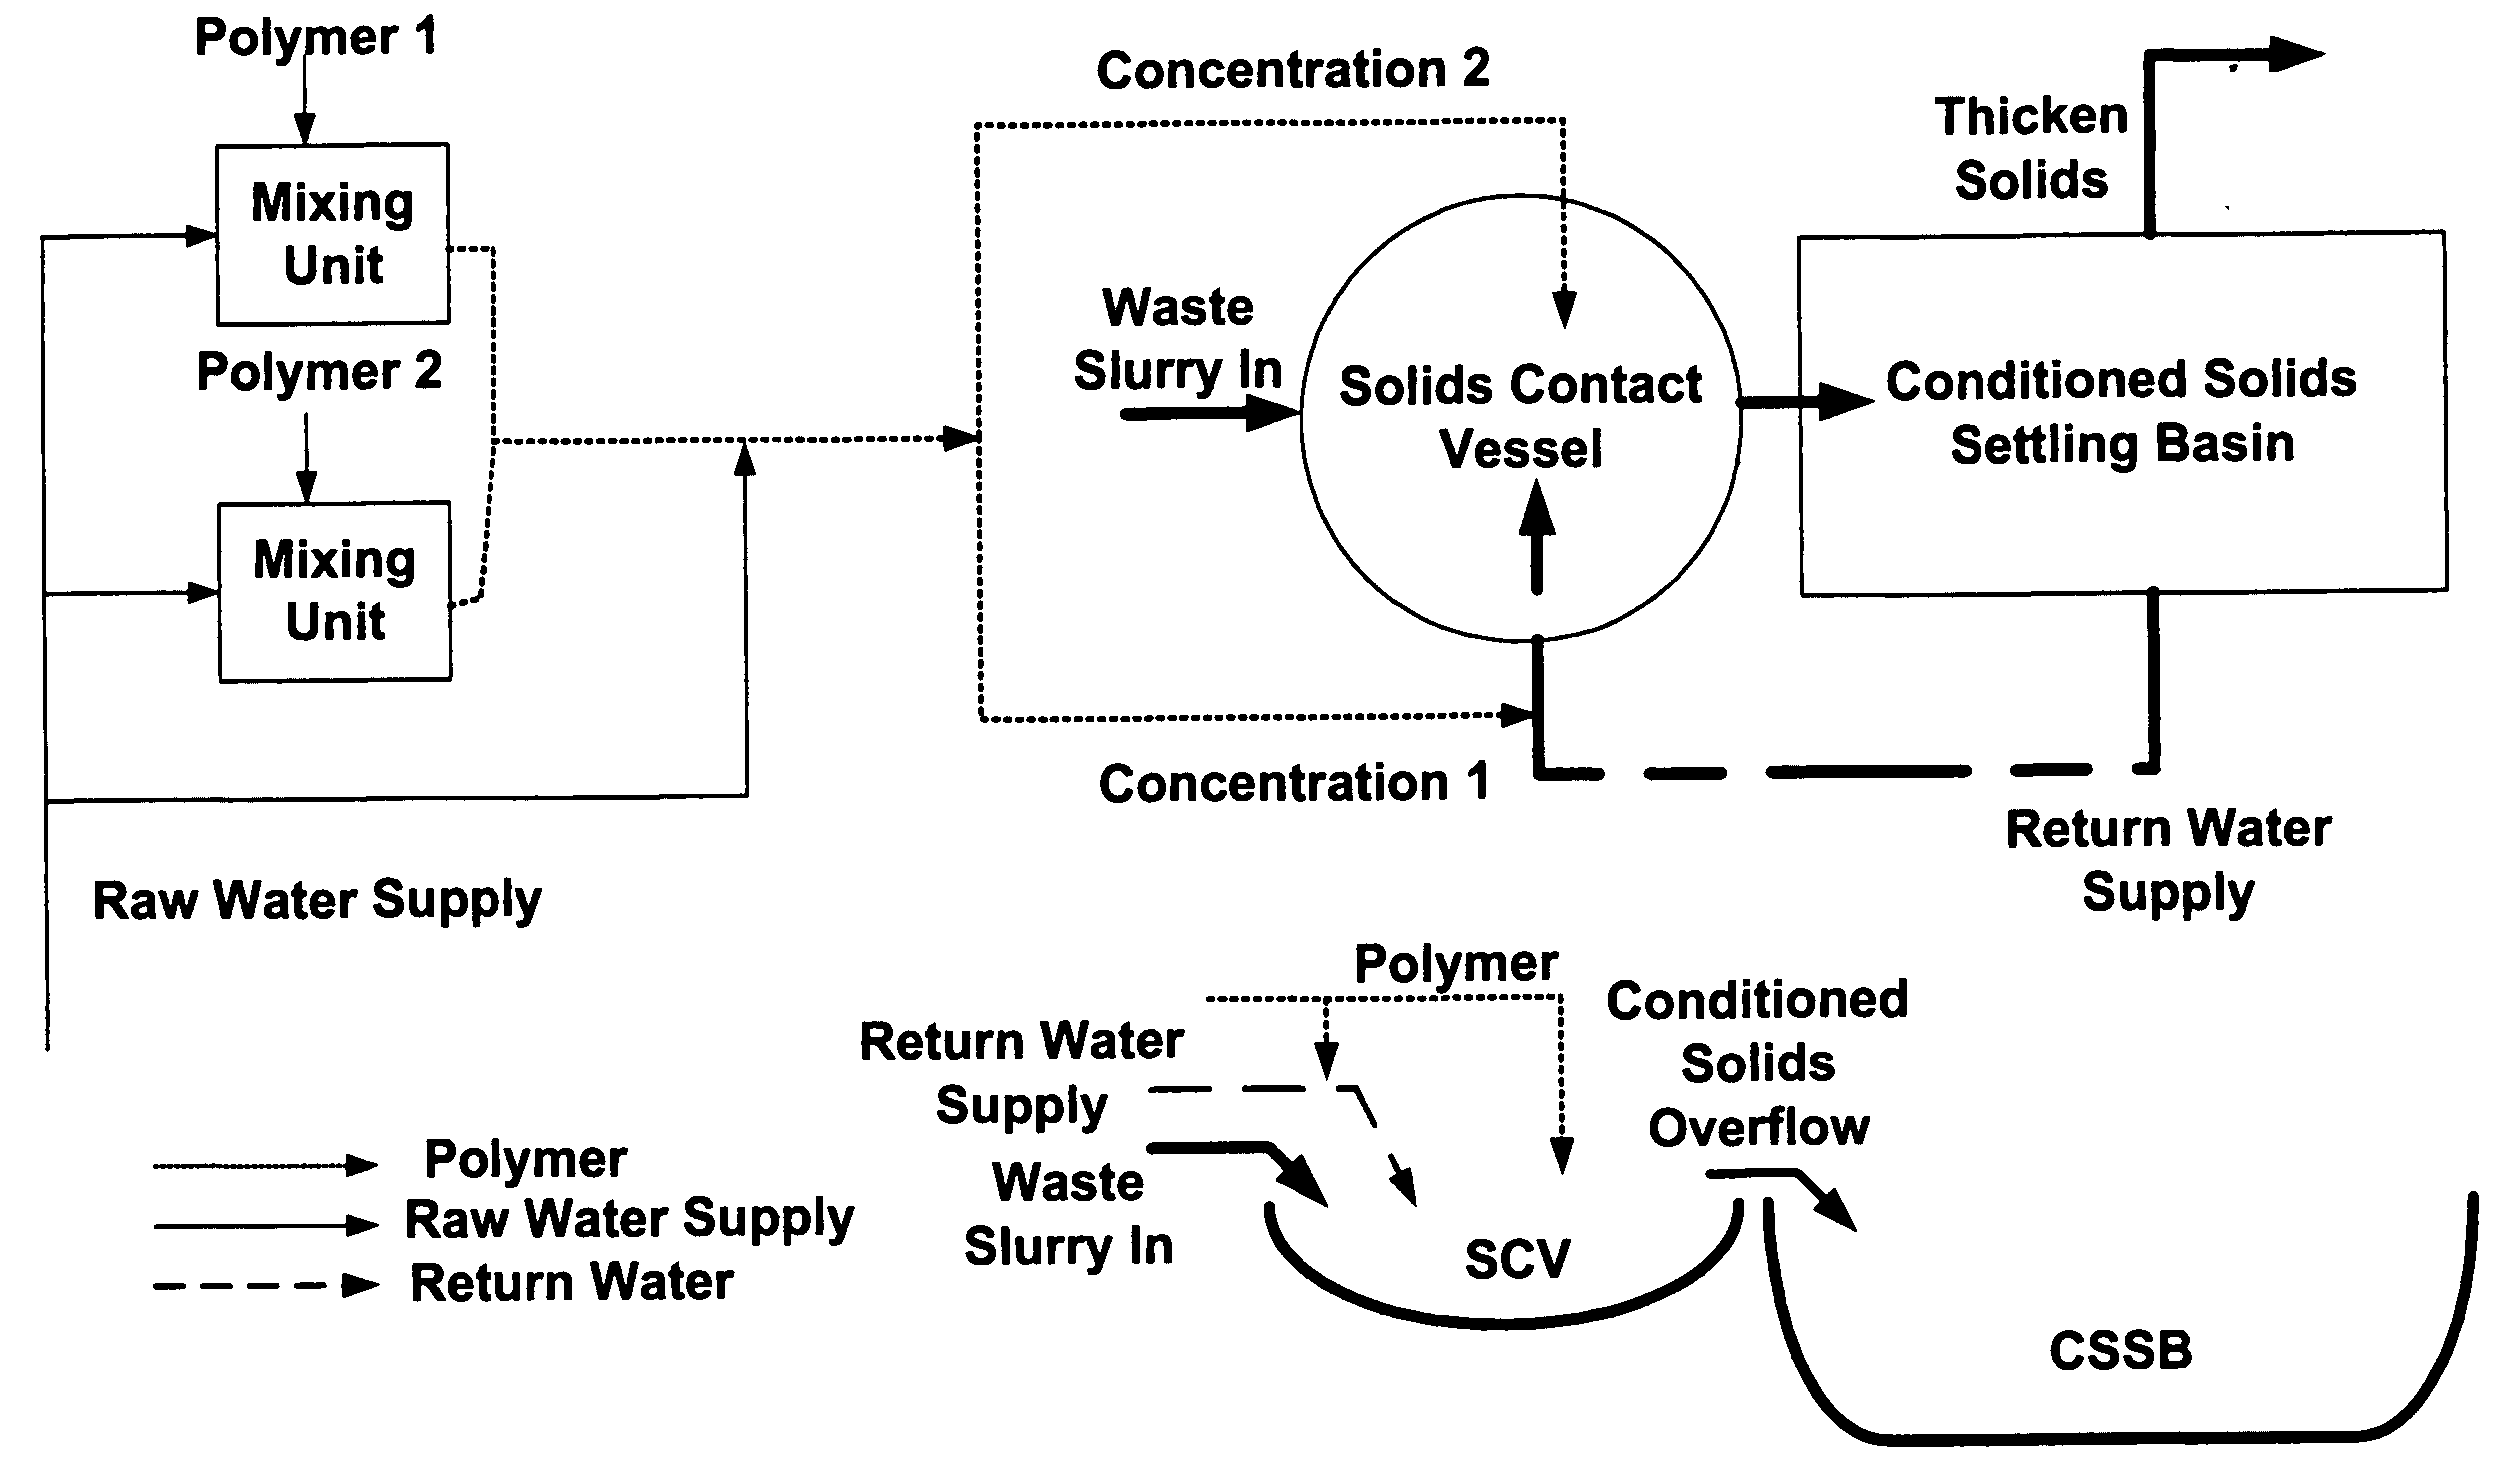 Metals/minerals recovery and waste treatment process